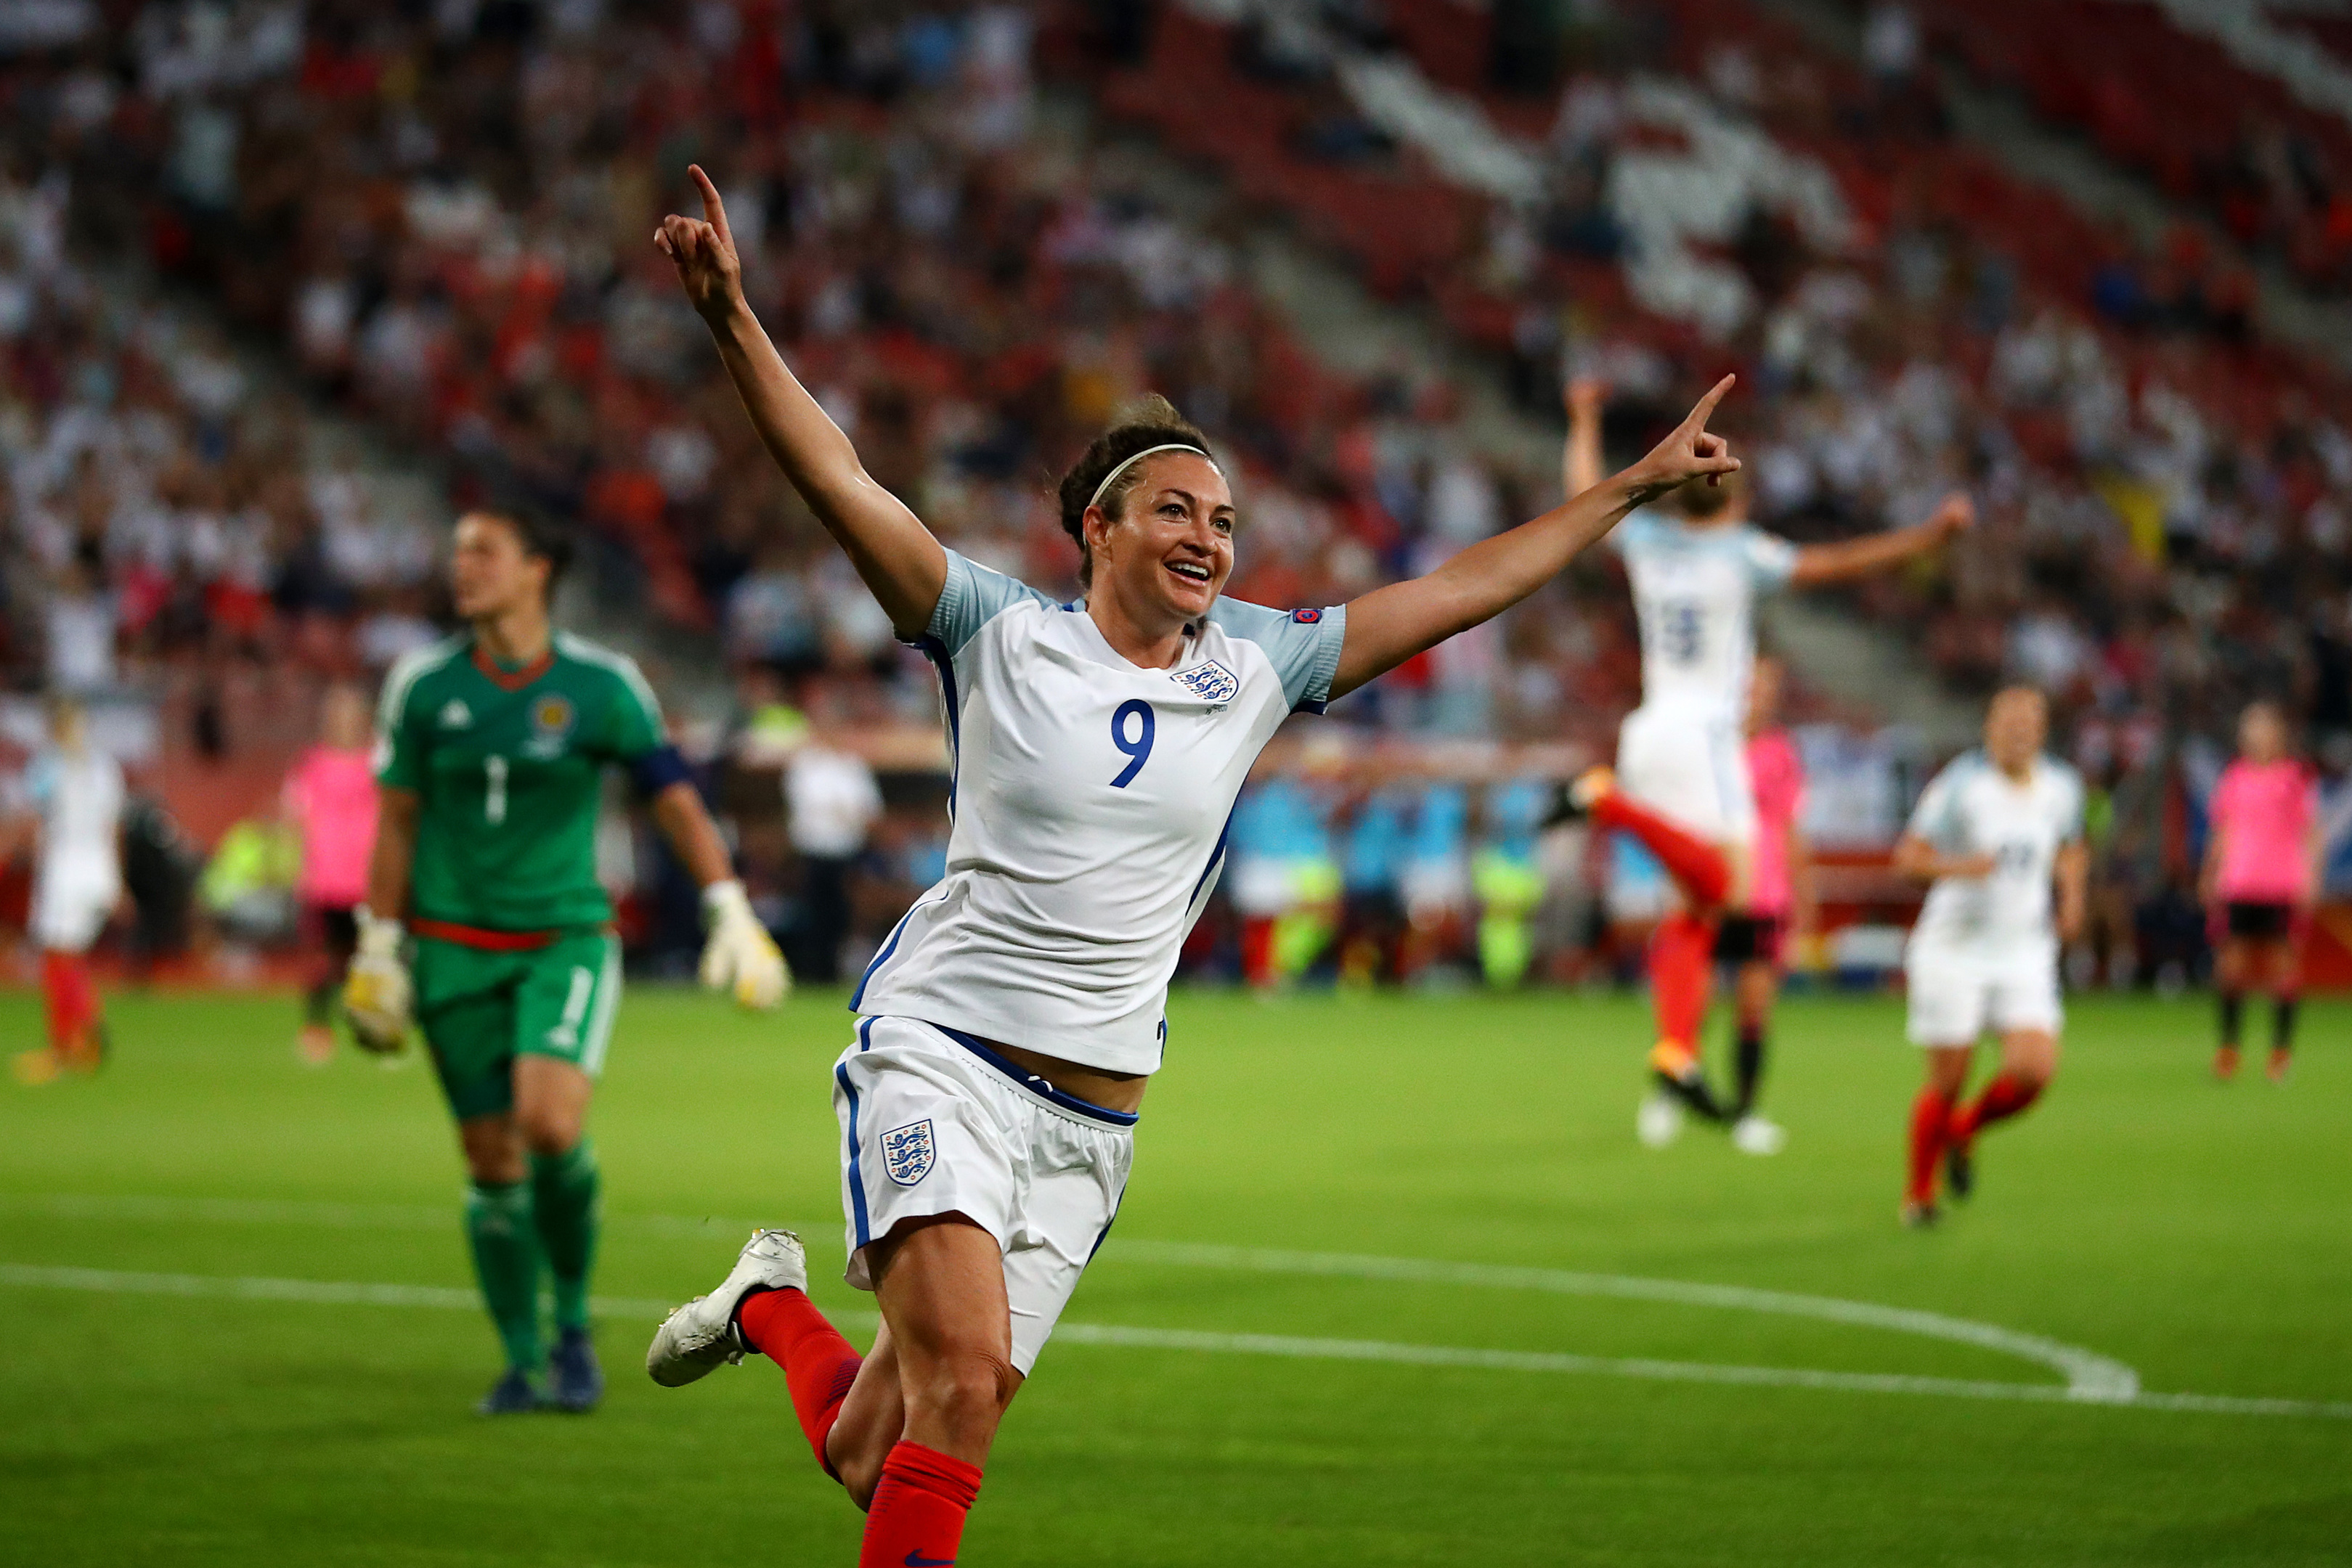 Jodie Taylor of England celebrates after scoring her hatrick (Dean Mouhtaropoulos/Getty Images)